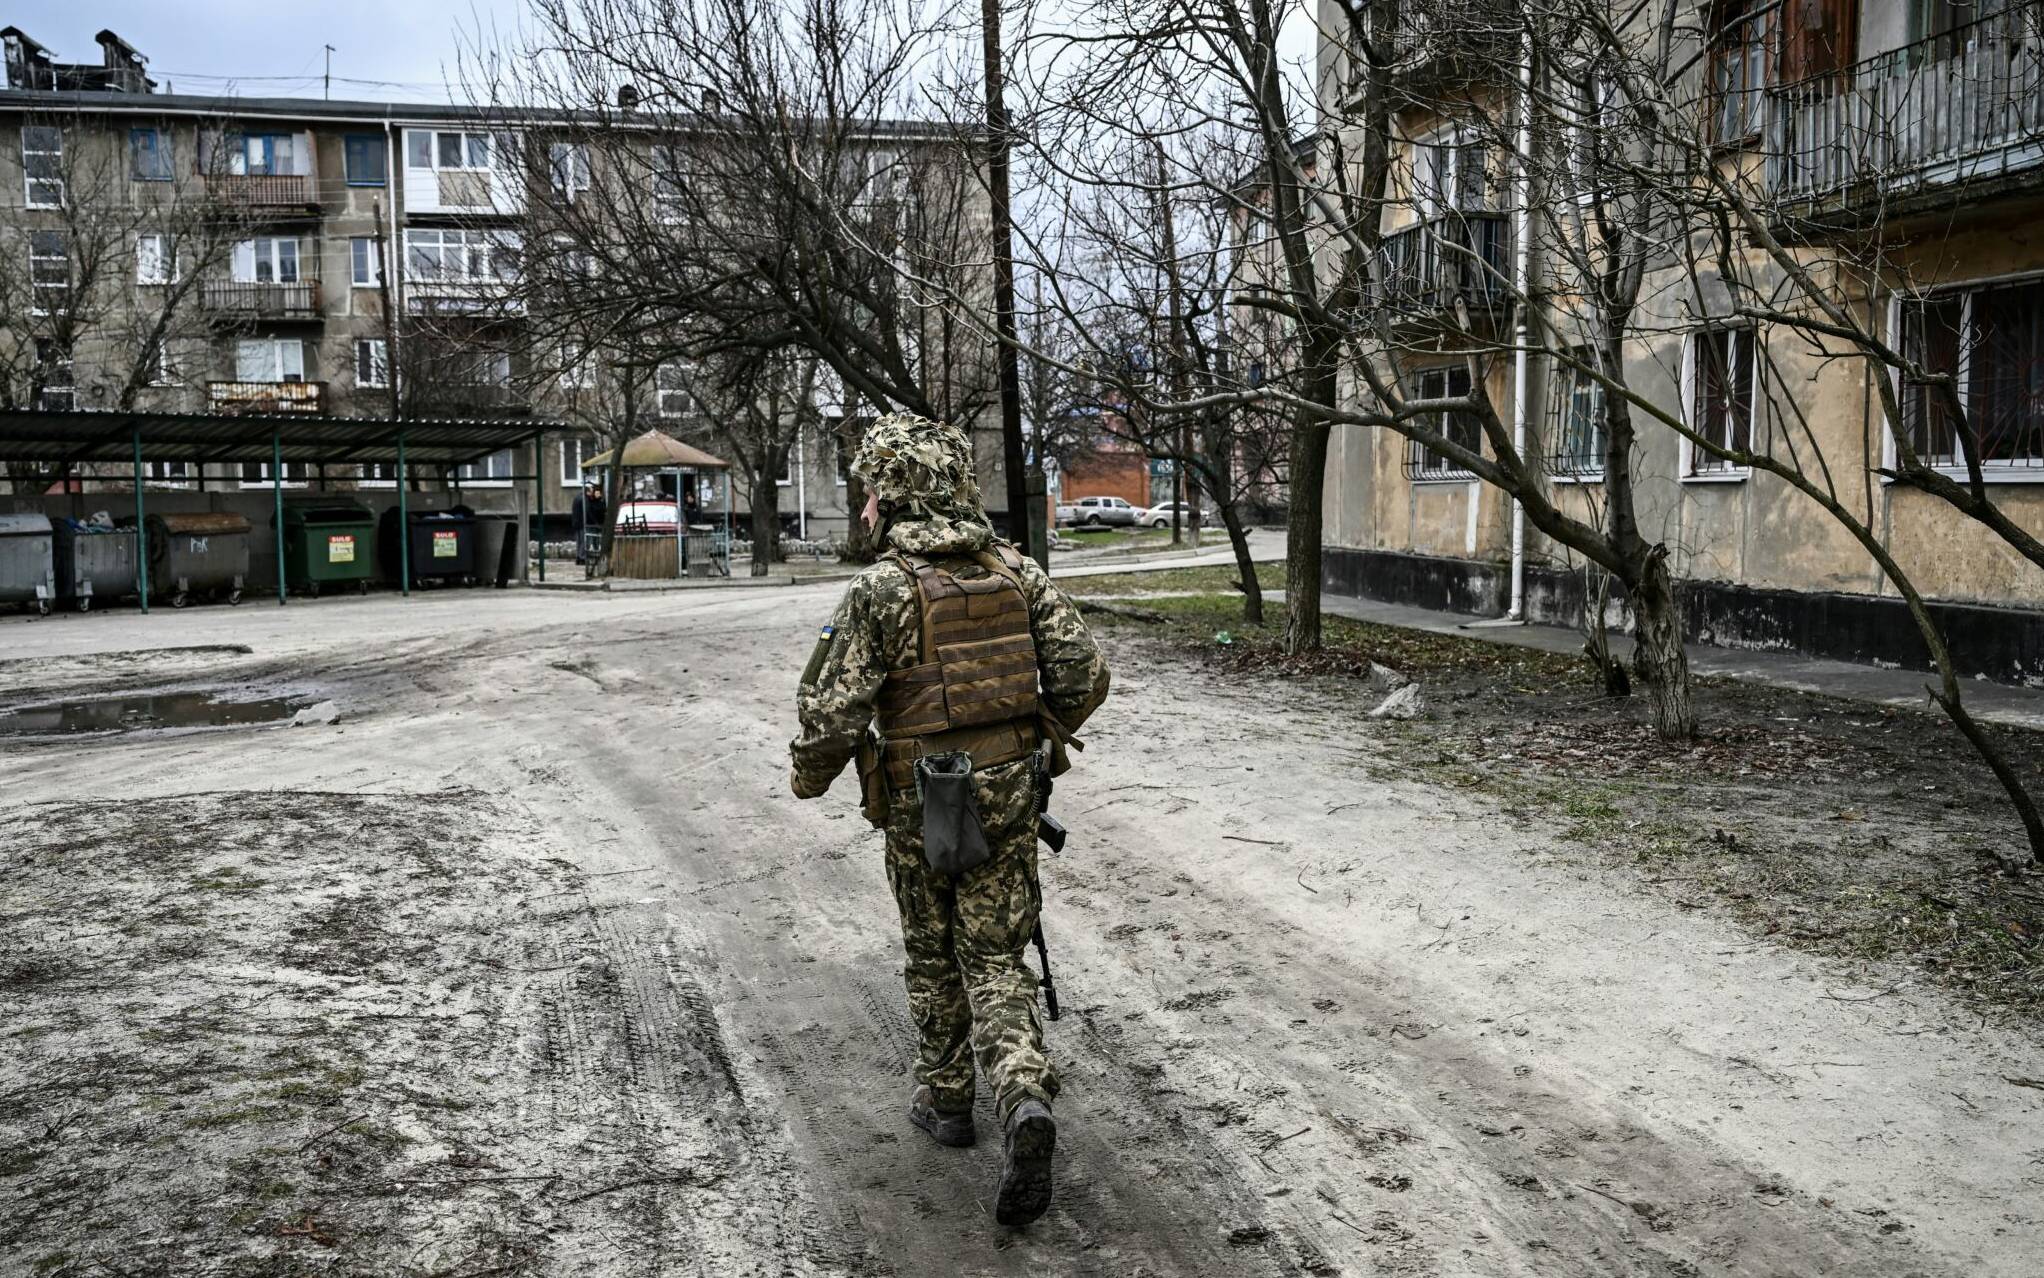 A Ukraine army soldier walks in the town of Schastia, near the eastern Ukraine city of Lugansk, on February 22, 2022, a day after Russia recognised east Ukraine's separatist republics and ordered the Russian army to send troops there as "peacekeepers." - The recognition of Donetsk and Lugansk rebel republics effectively buries the fragile peace process regulating the conflict in eastern Ukraine, known as the Minsk accords. Russian President recognised the rebels despite the West repeatedly warning him not to and threatening Moscow with a massive sanctions response. (Photo by Aris Messinis / AFP)